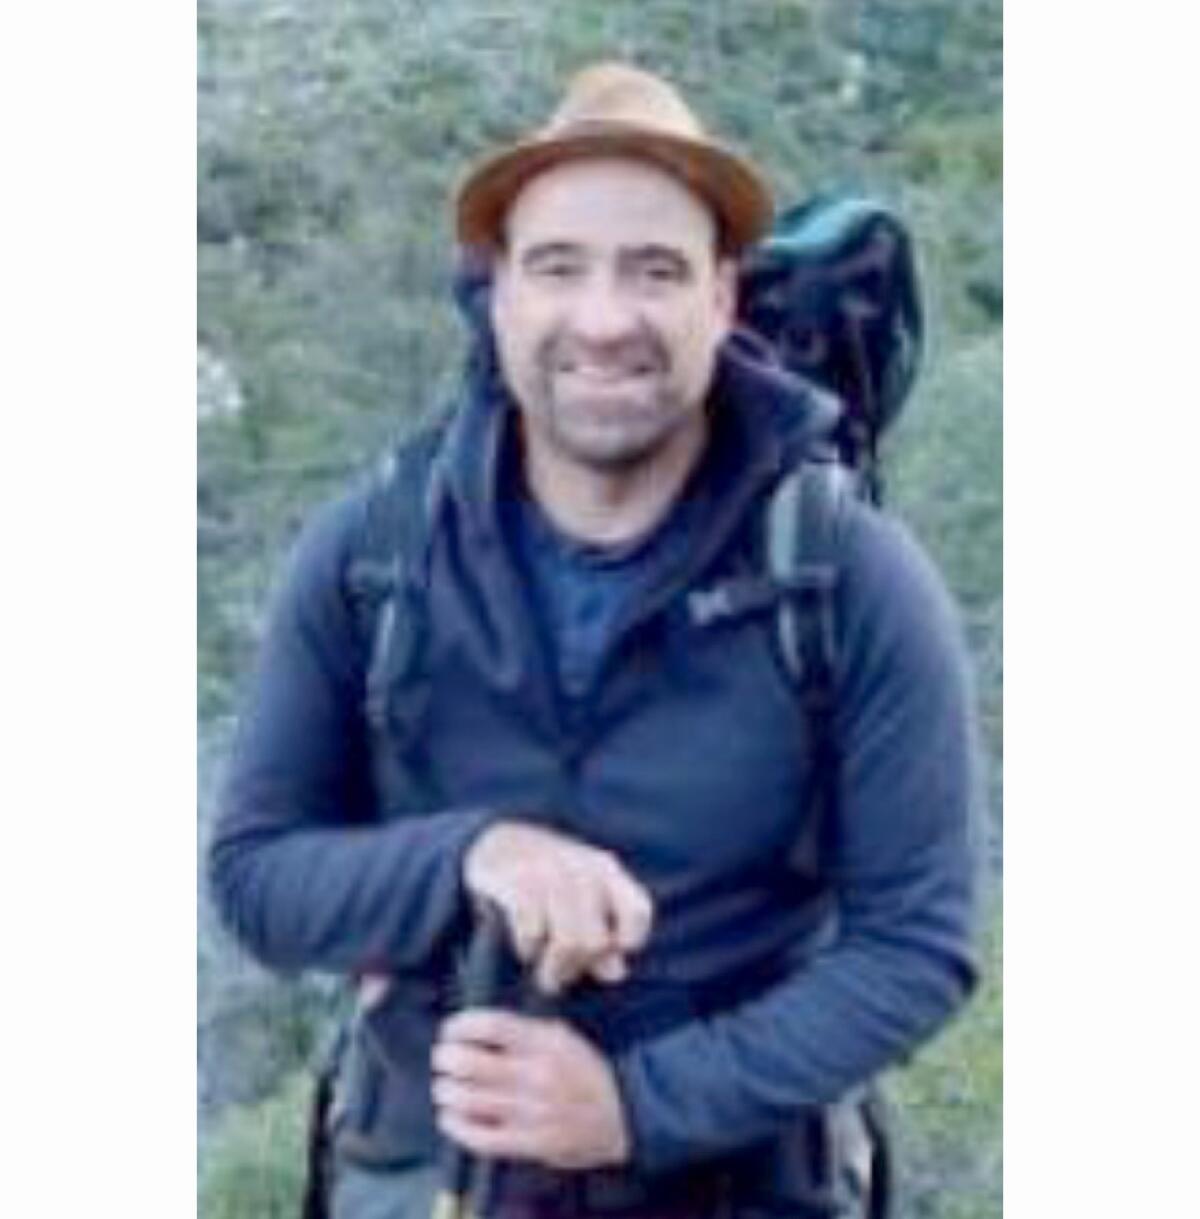 A man in a jacket and carrying hiking gear is smiling.